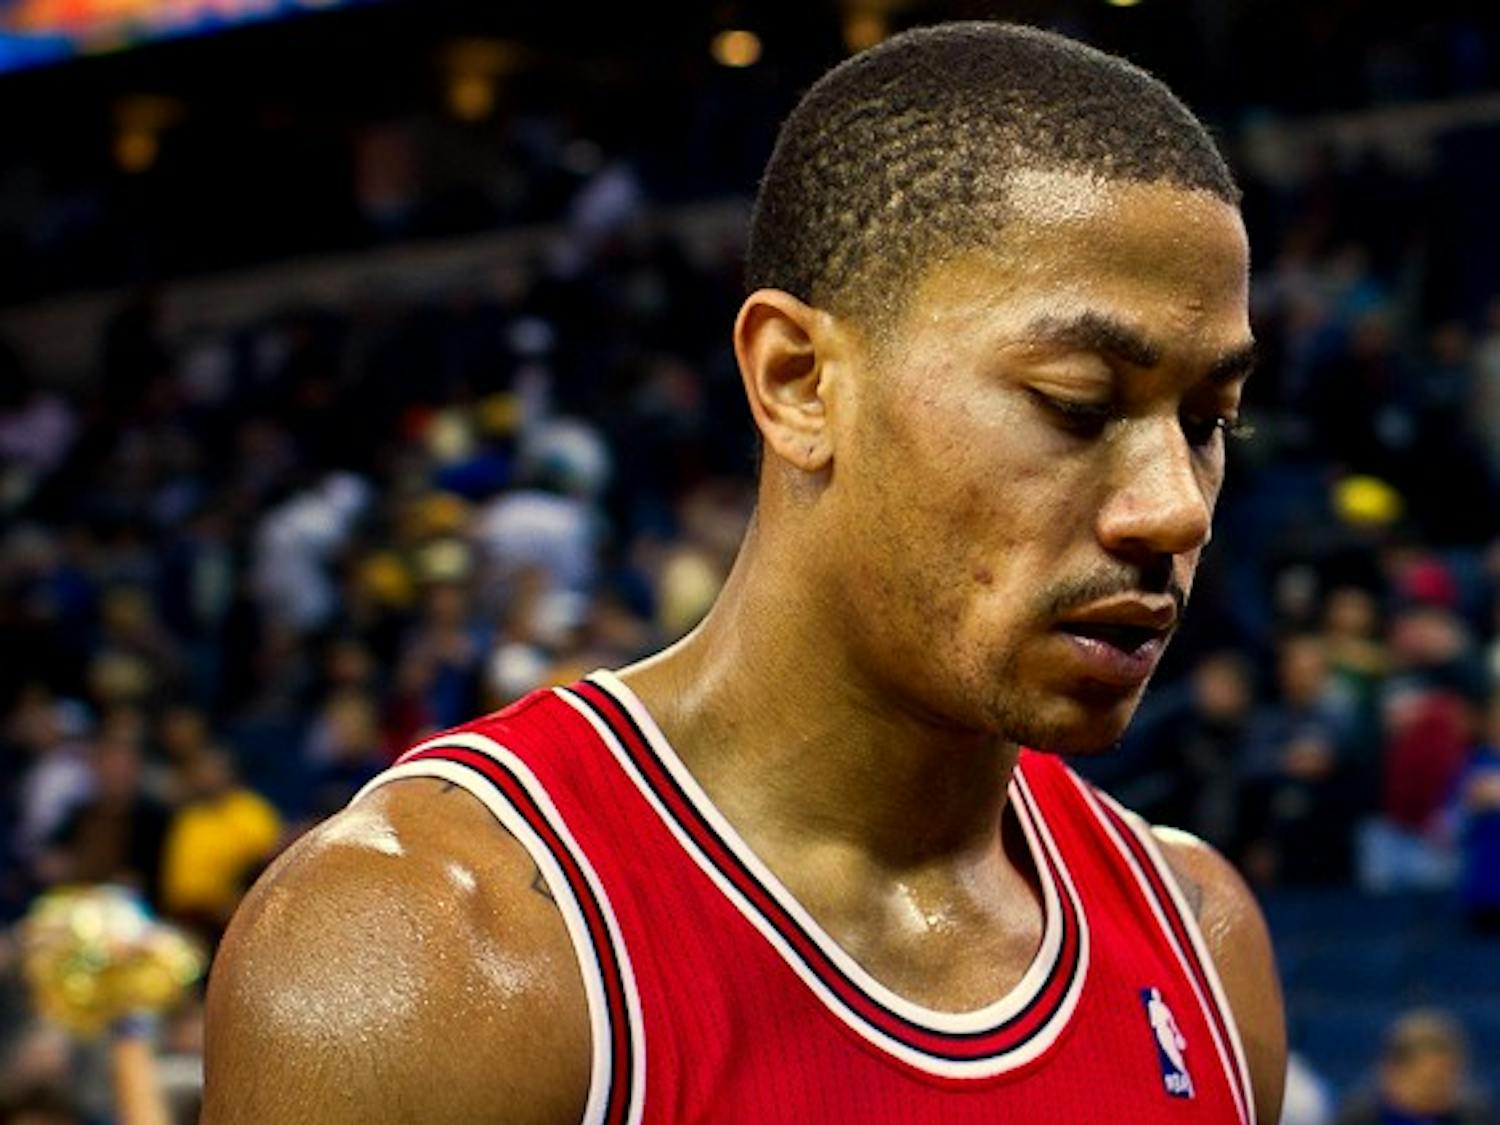 Derrick Rose, pictured during his 2011 MVP year, was accused of sexual assault in 2016, complicating the reaction to his seemingly heroic comeback story.